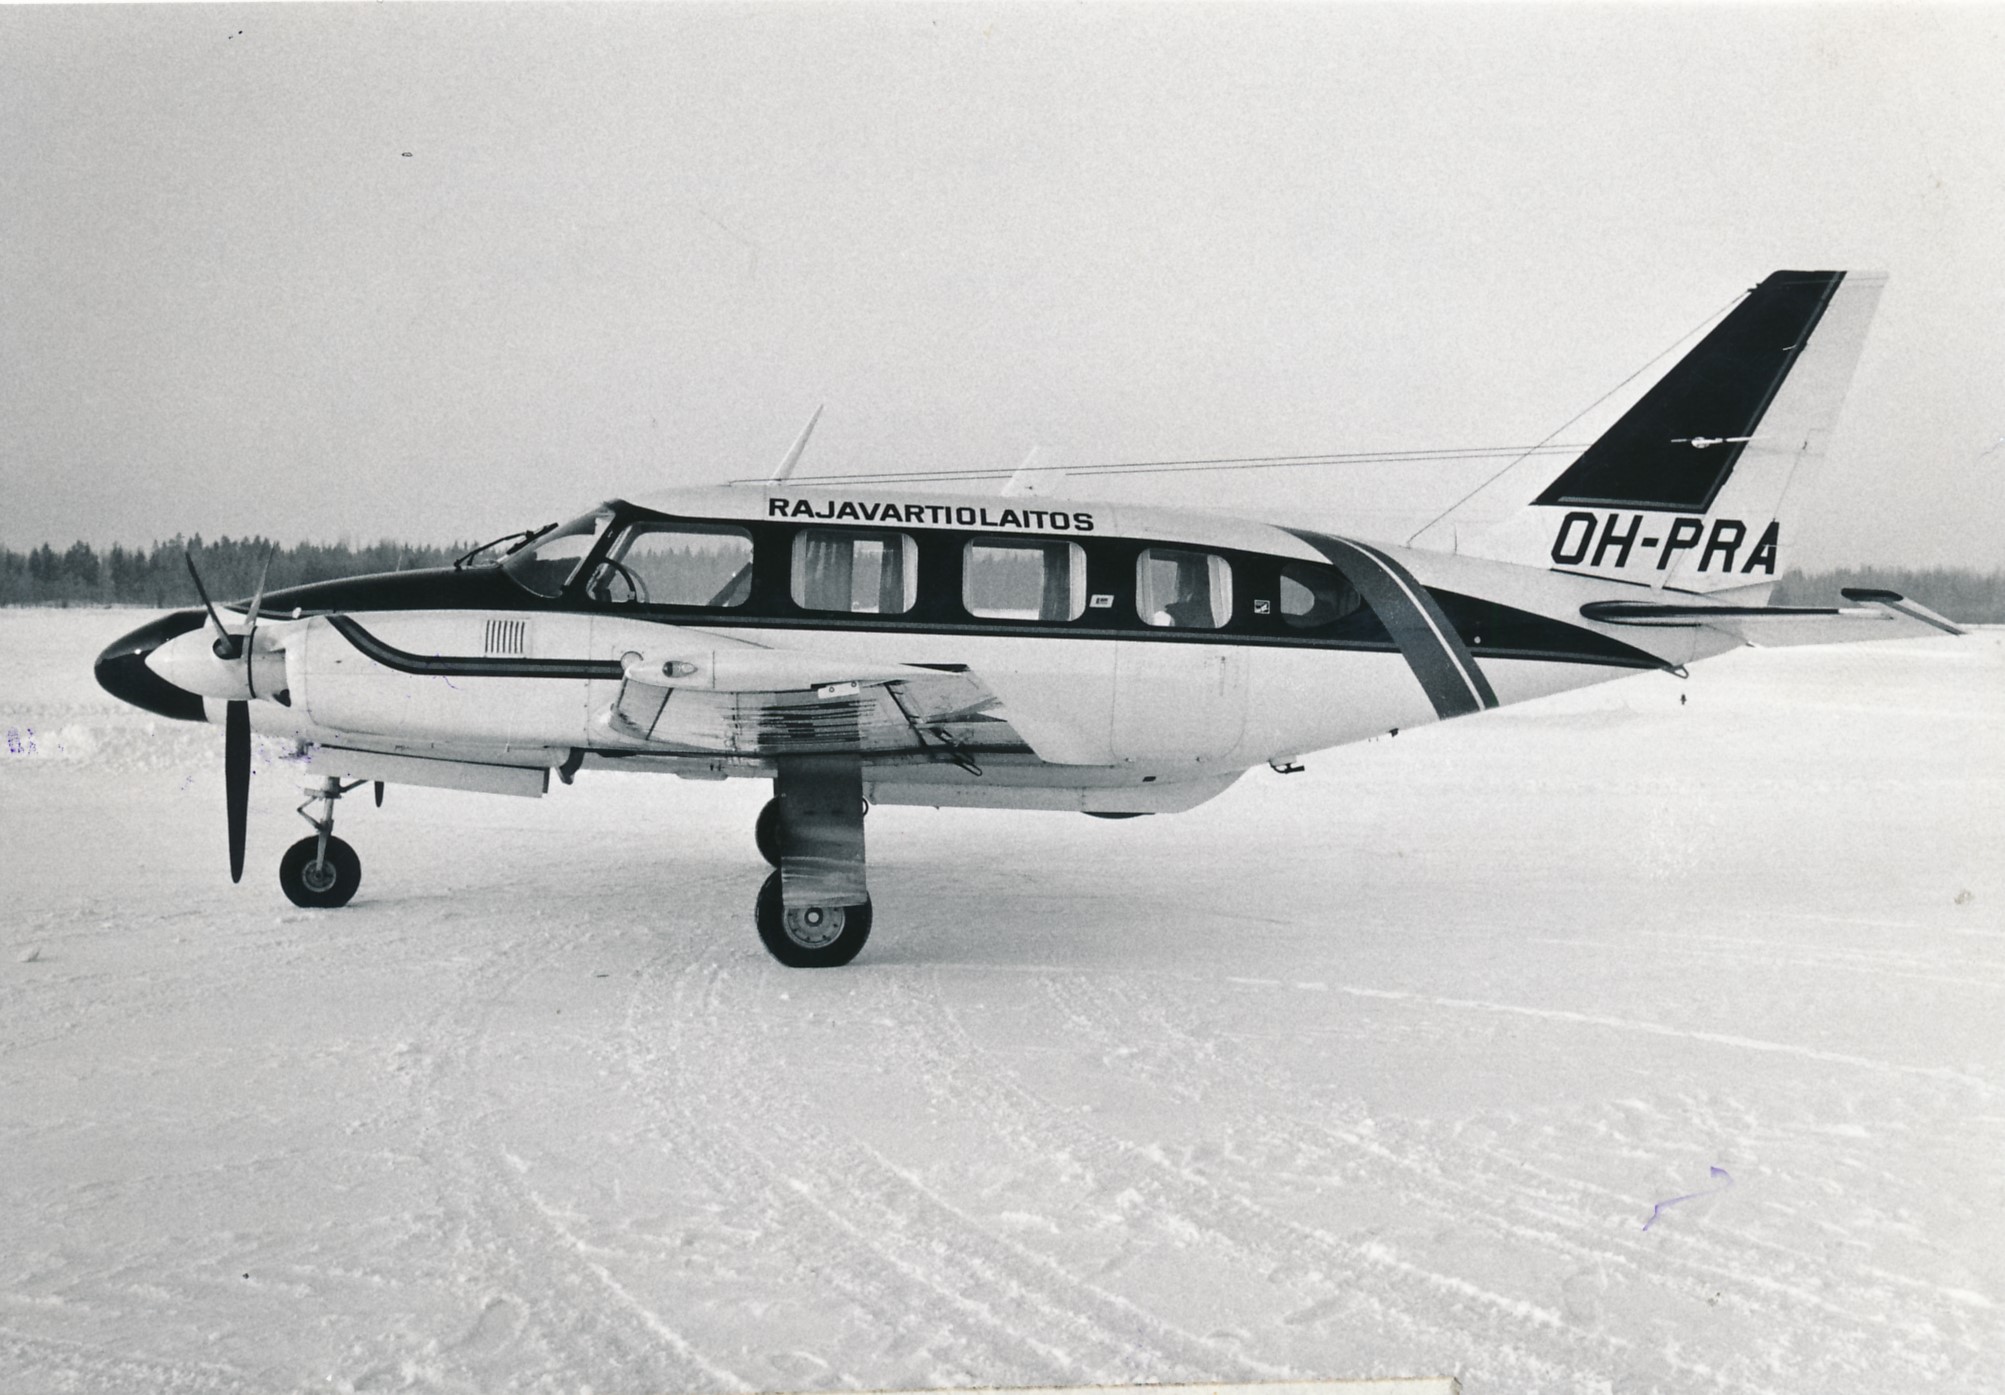 A twin-engine aeroplane in a winter landscape, photographed from the side. On the side of the aeroplane is the text Rajavartiolaitos (Finnish Border Guard).